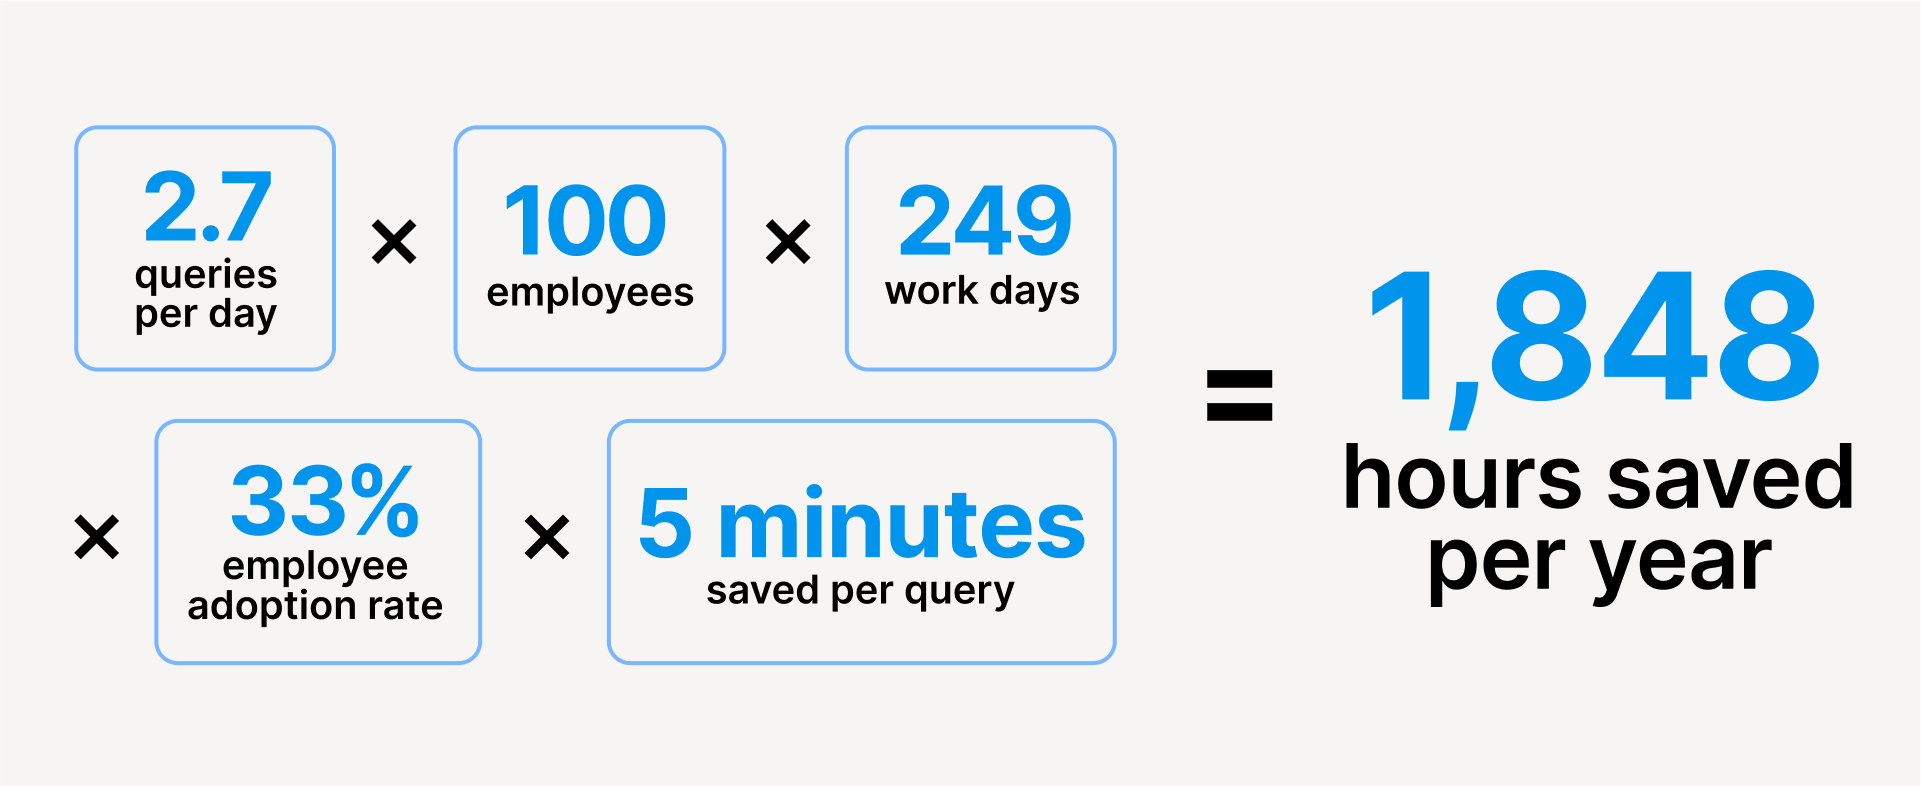 Your time savings may vary depending on your usage and employee adoption rate.